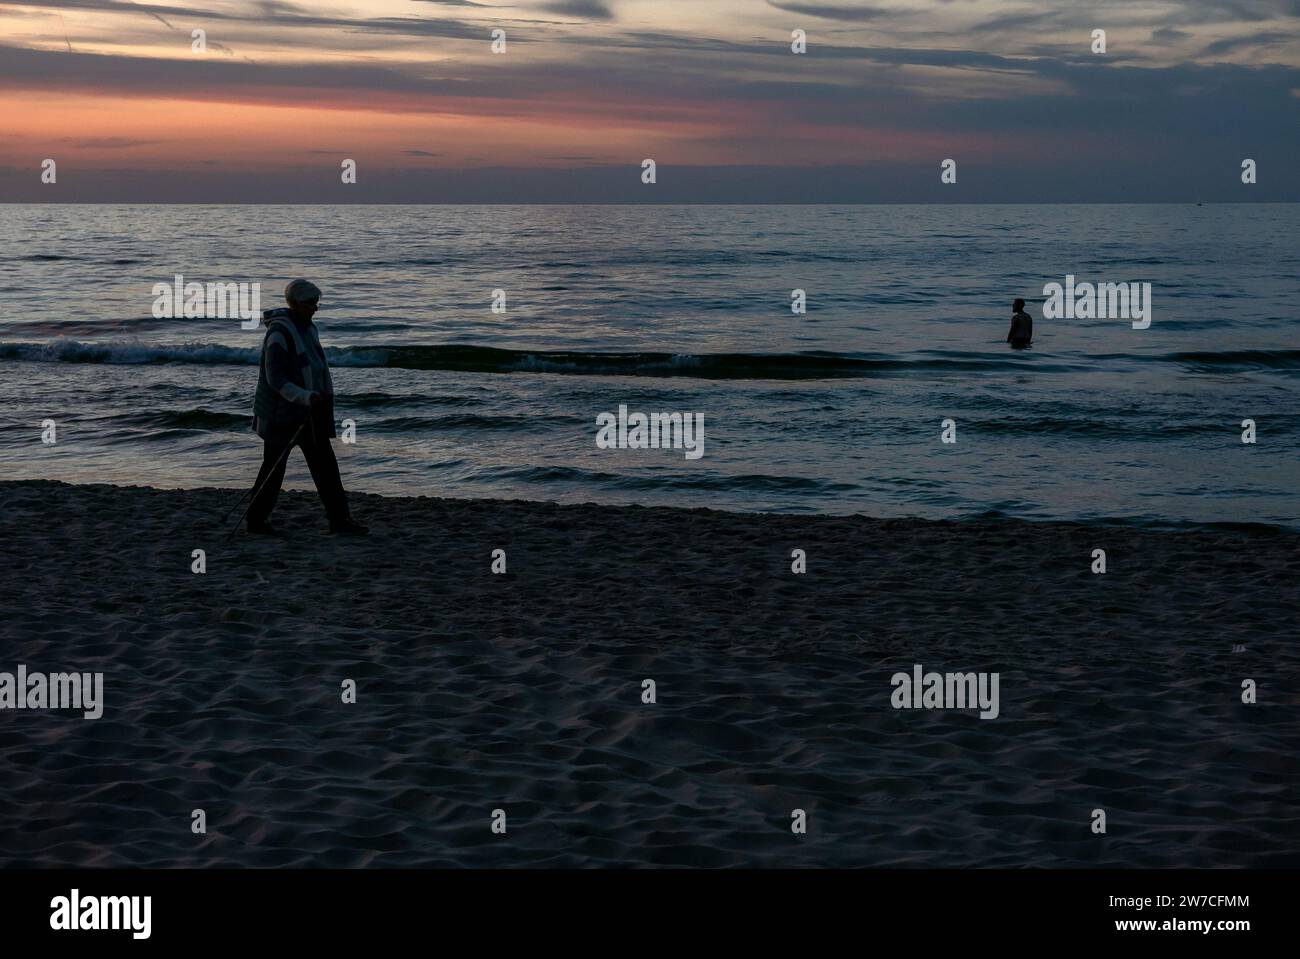 08.09.2018, Poland, Kolobrzeg, West Pomerania - Sillhouettes of holidaymakers on the Baltic Sea coast, man standing in the water at sunset. 00A180908D Stock Photo